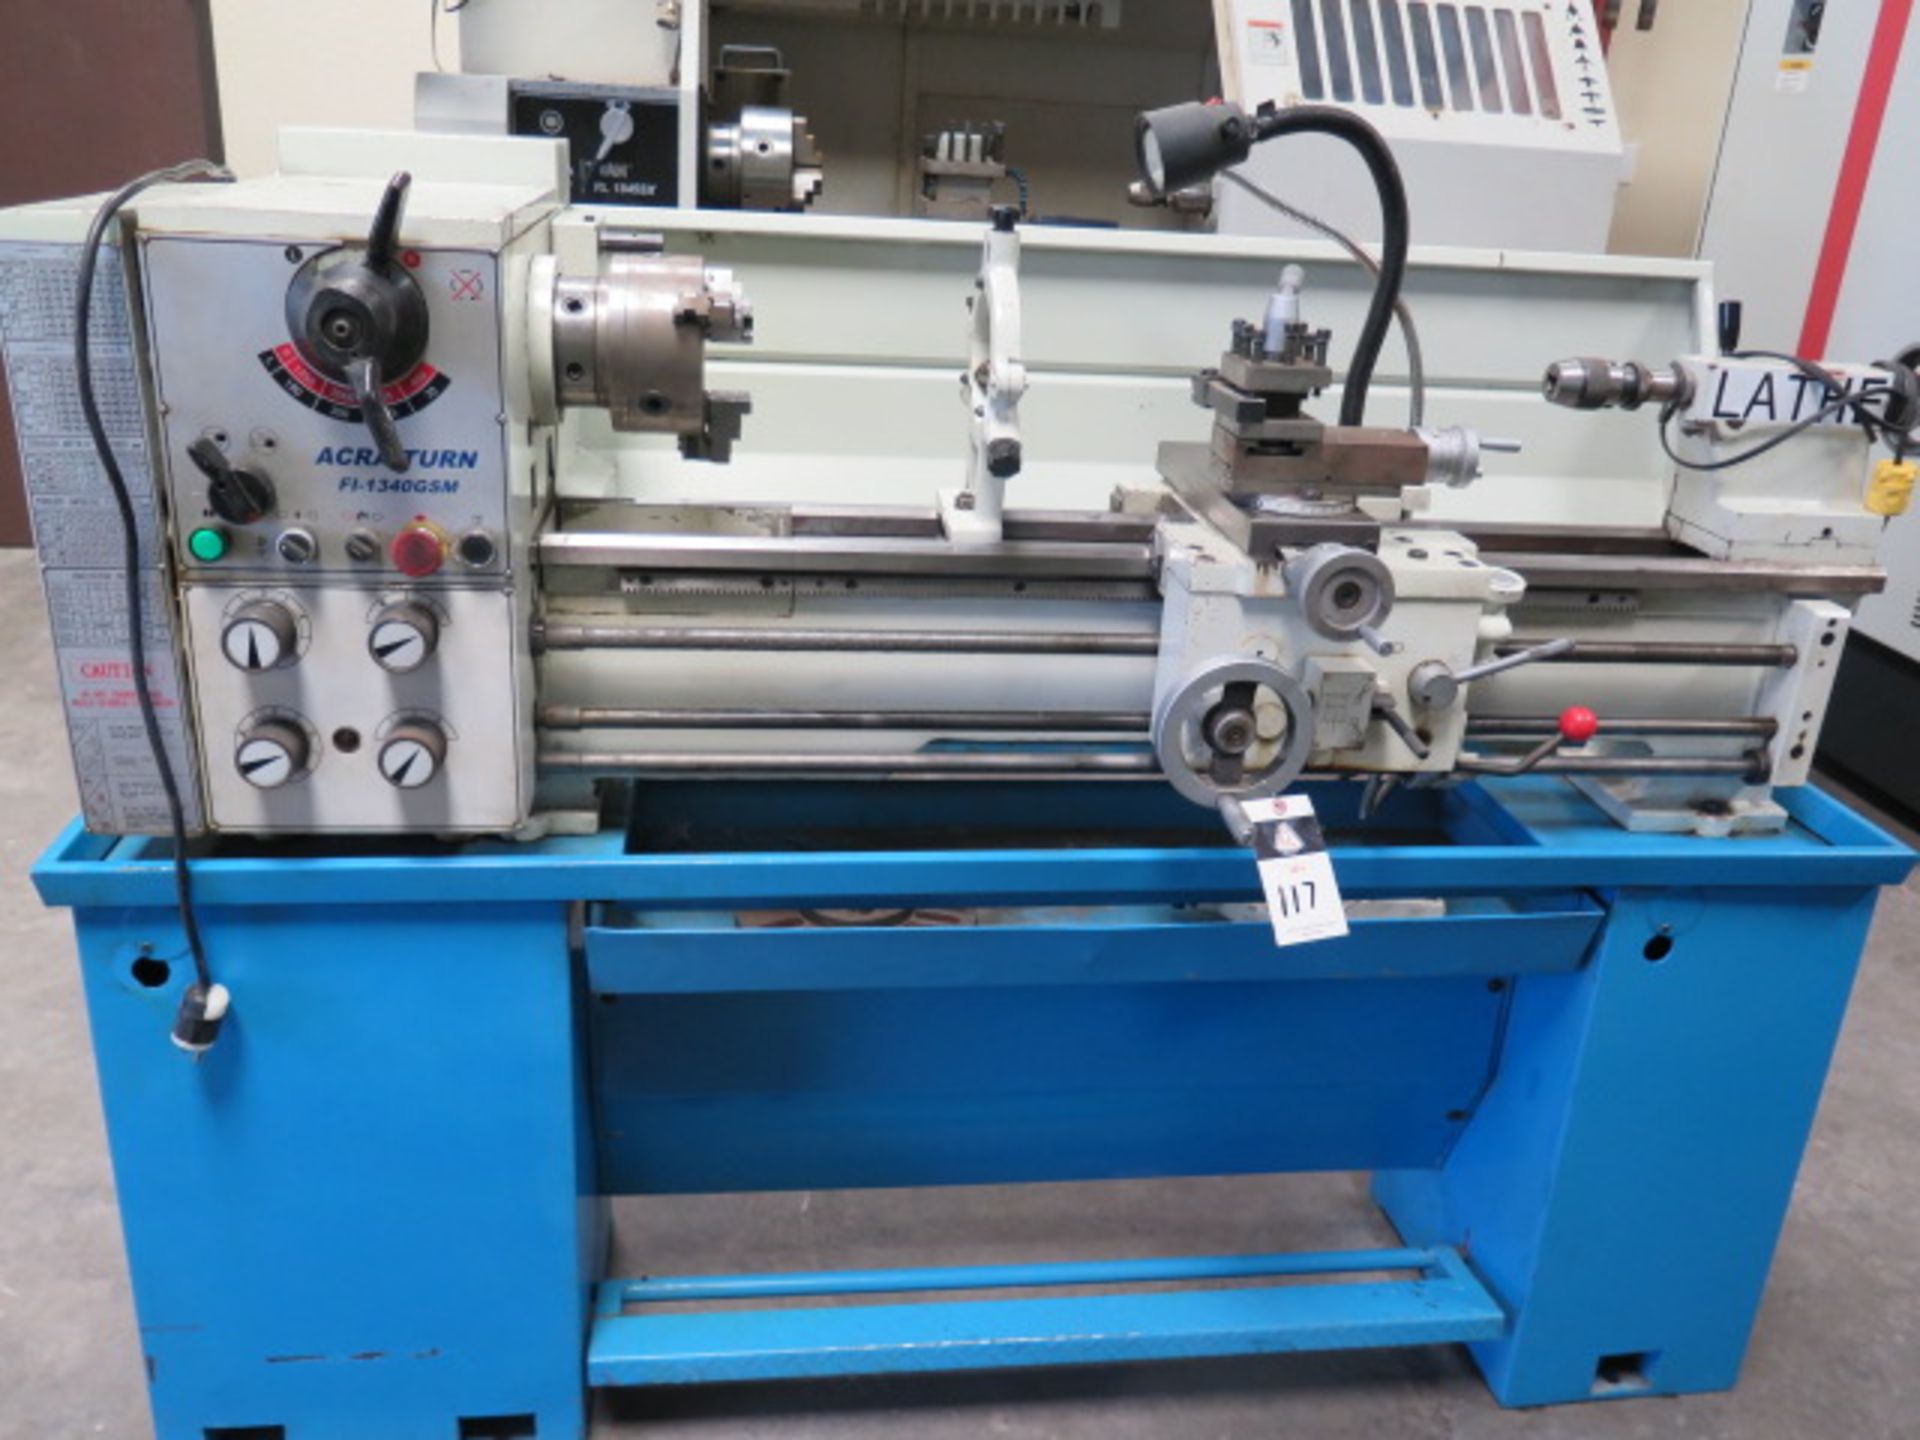 Acra Turn FI-1340 GSM 13" x 40" Geared Gap Bed Lathe w/ 70-2000 RPM, Inch/mm Threading, SOLD AS IS